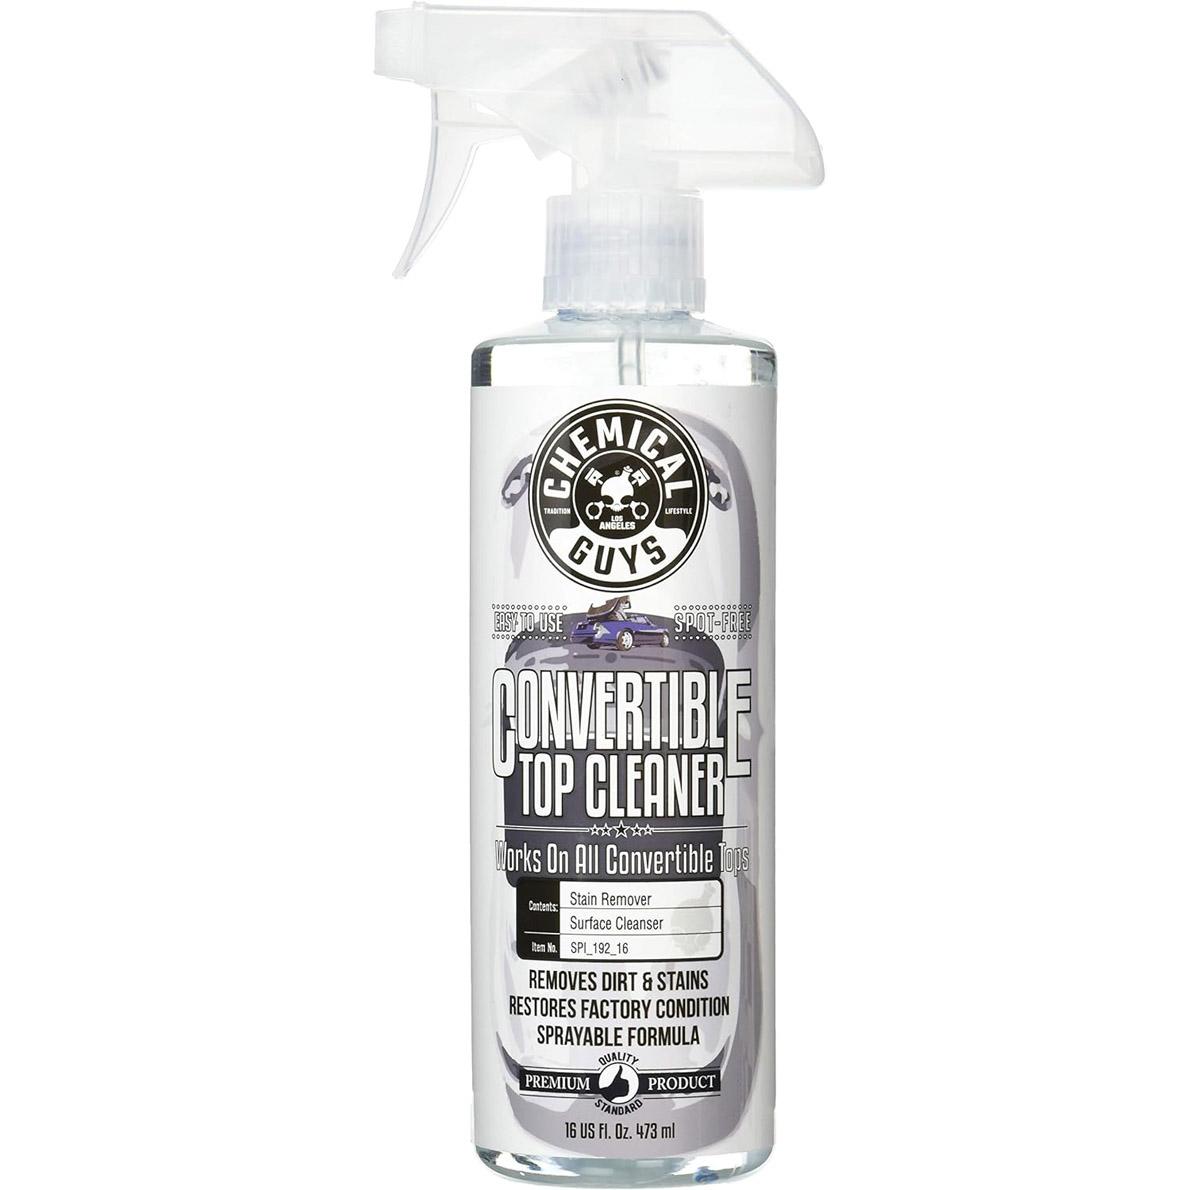 Chemical Guys 16oz Convertible Top Cleaner for $5.44 Shipped